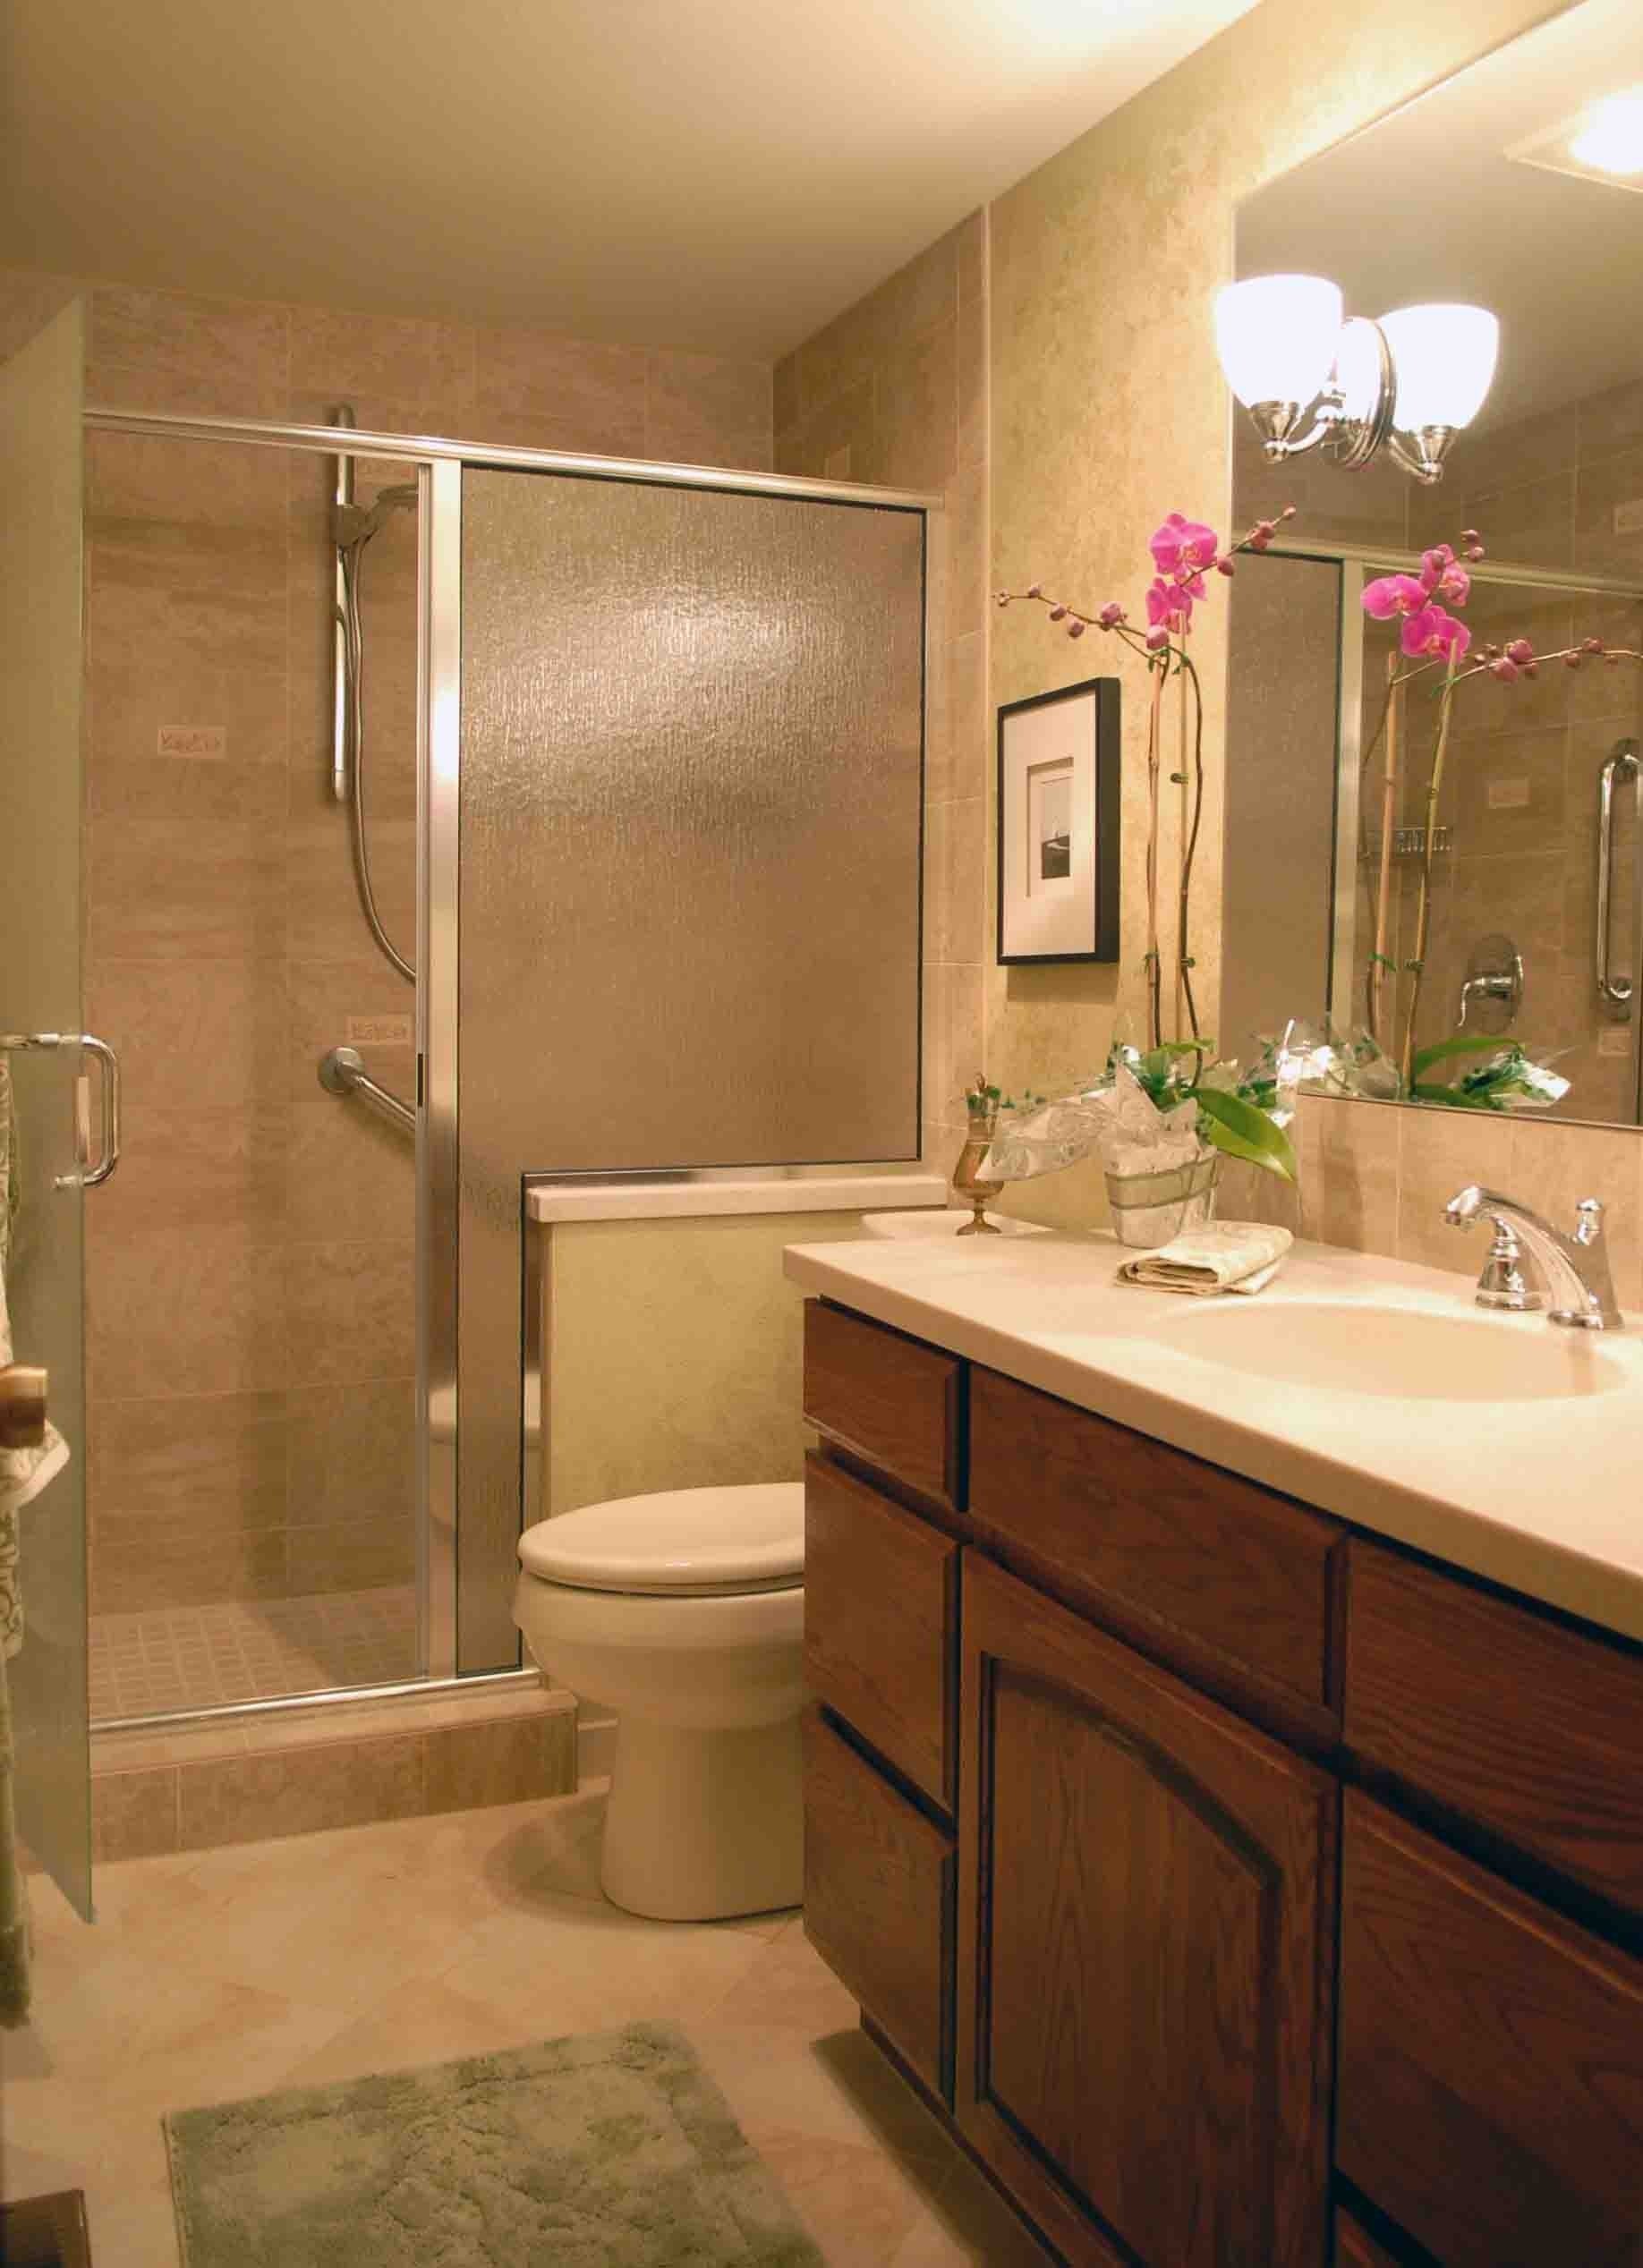 10 Pretty Remodeling Ideas For Small Bathrooms budgeting for a bathroom remodel theydesign in bathroom remodeling 2022